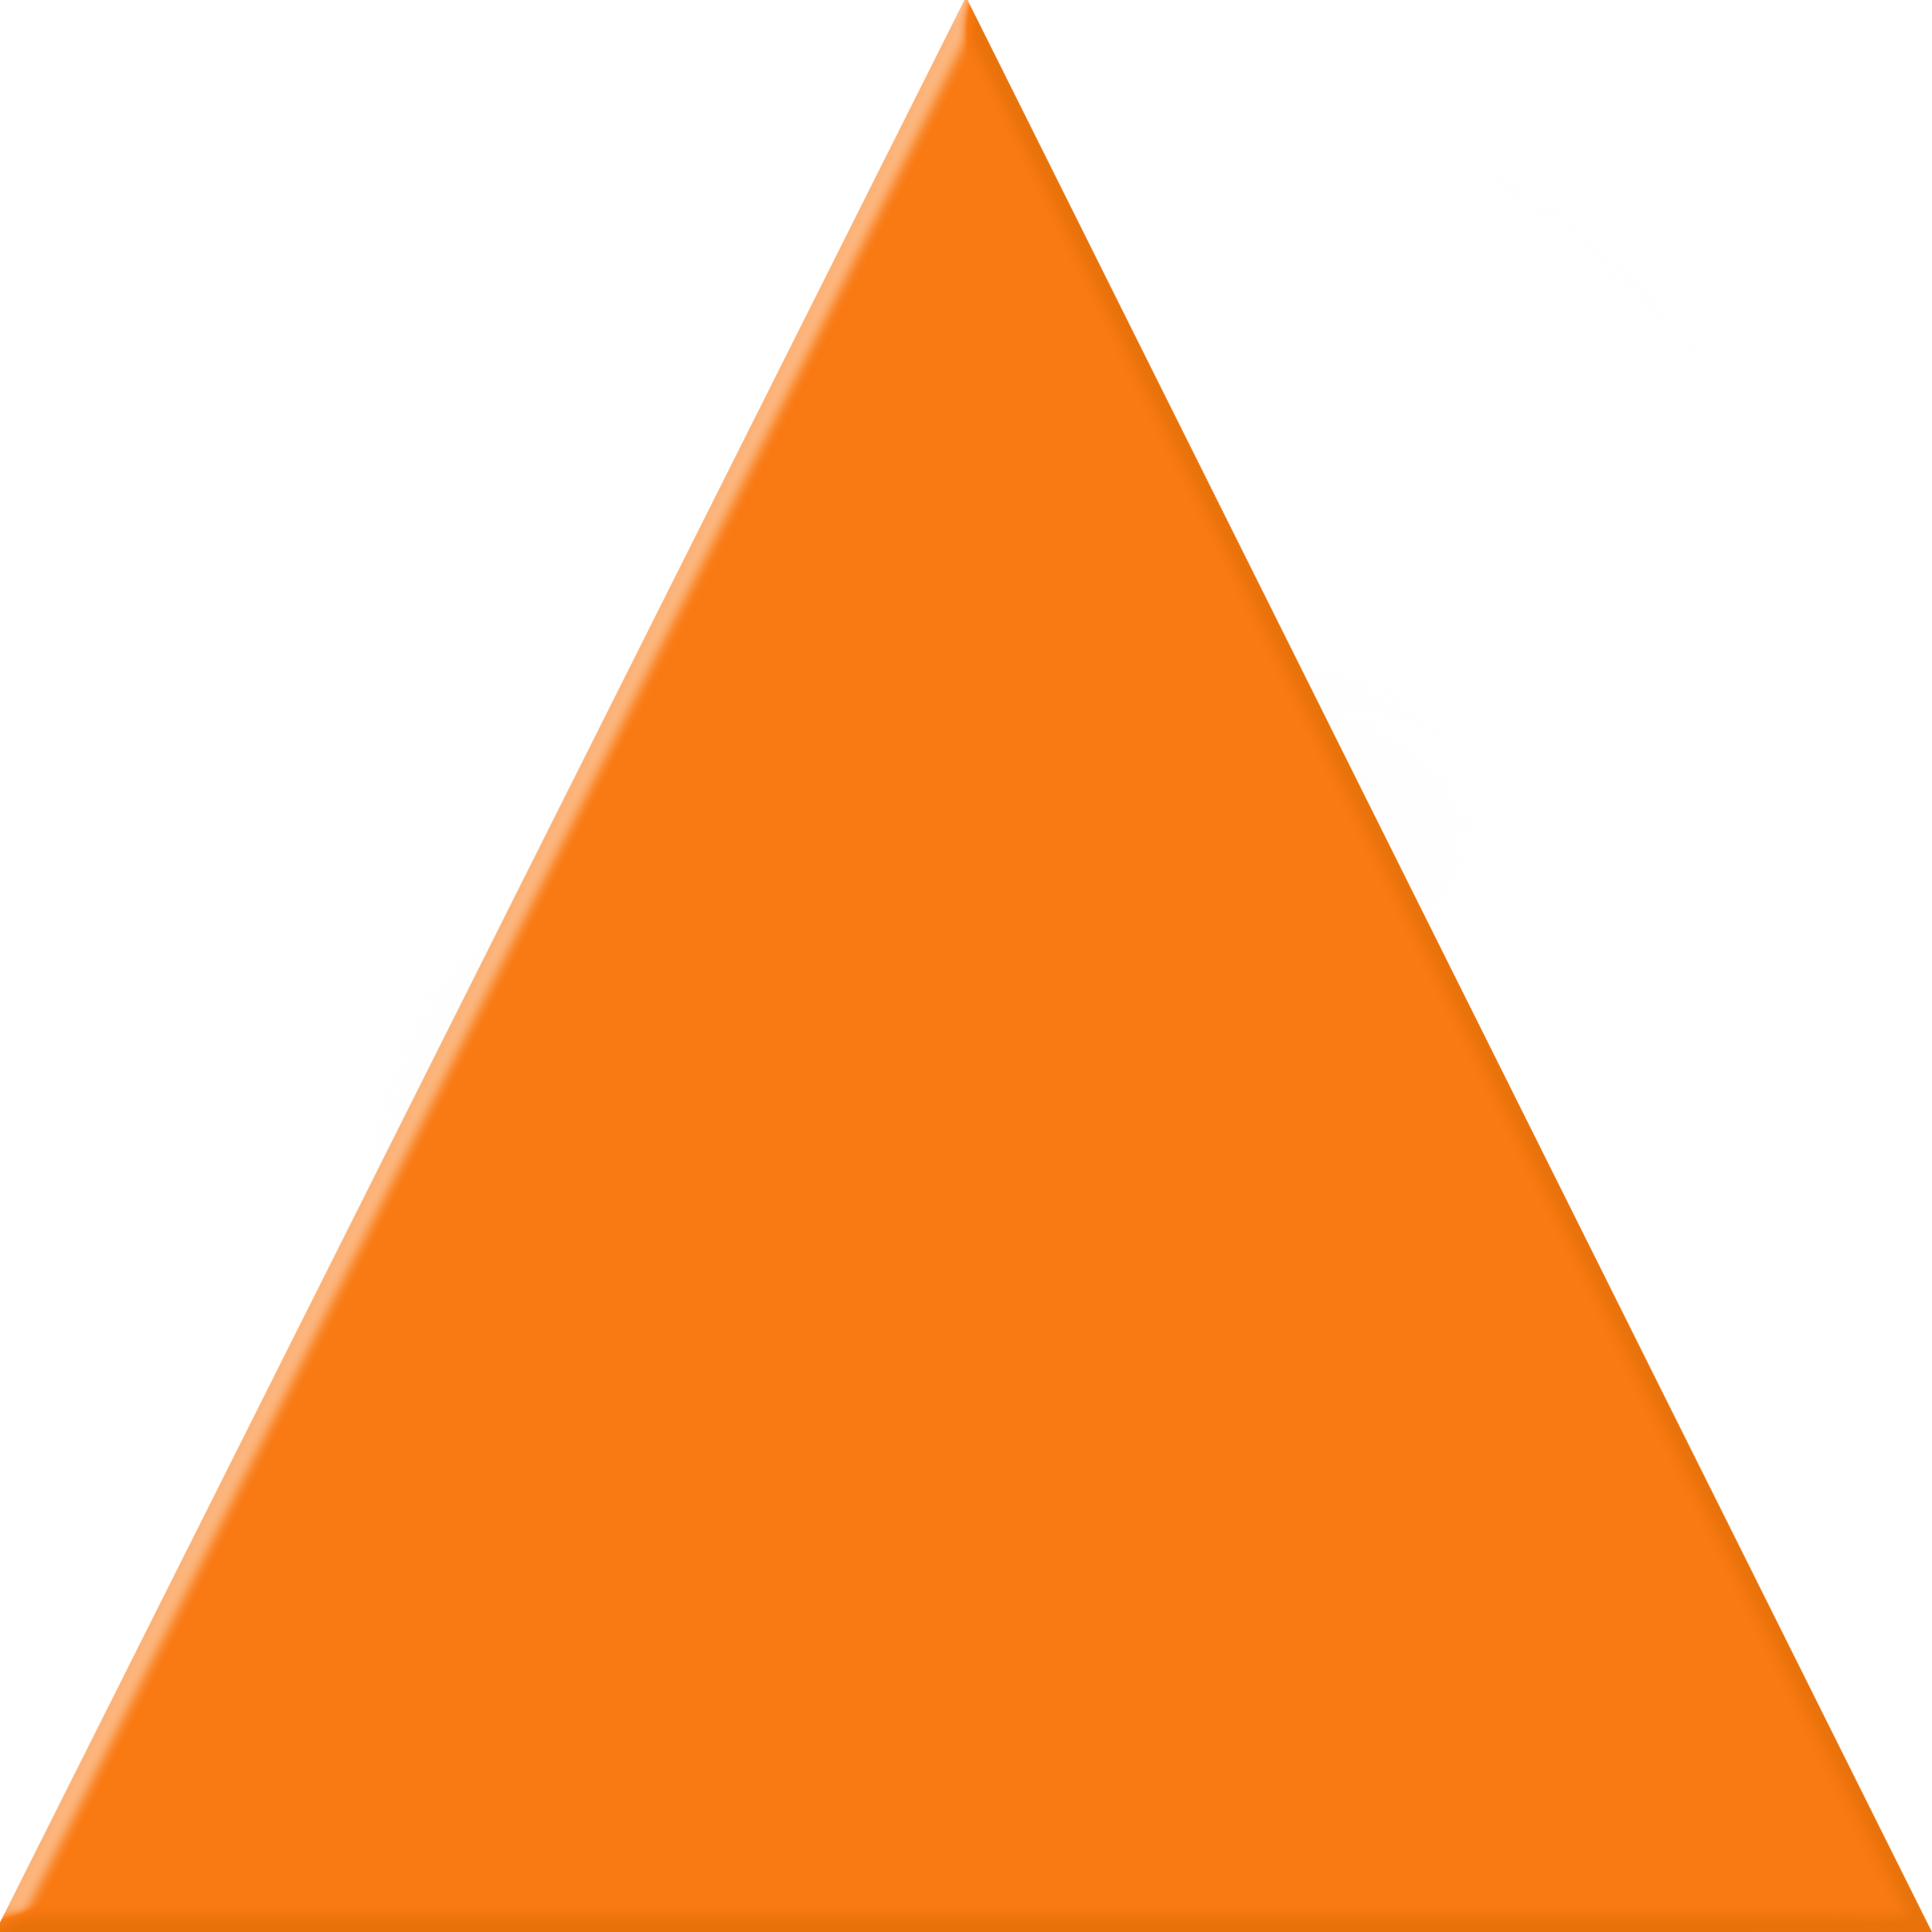 Orange Triangle Logo - Orange triangle image vector #42396 - Free Icons and PNG Backgrounds